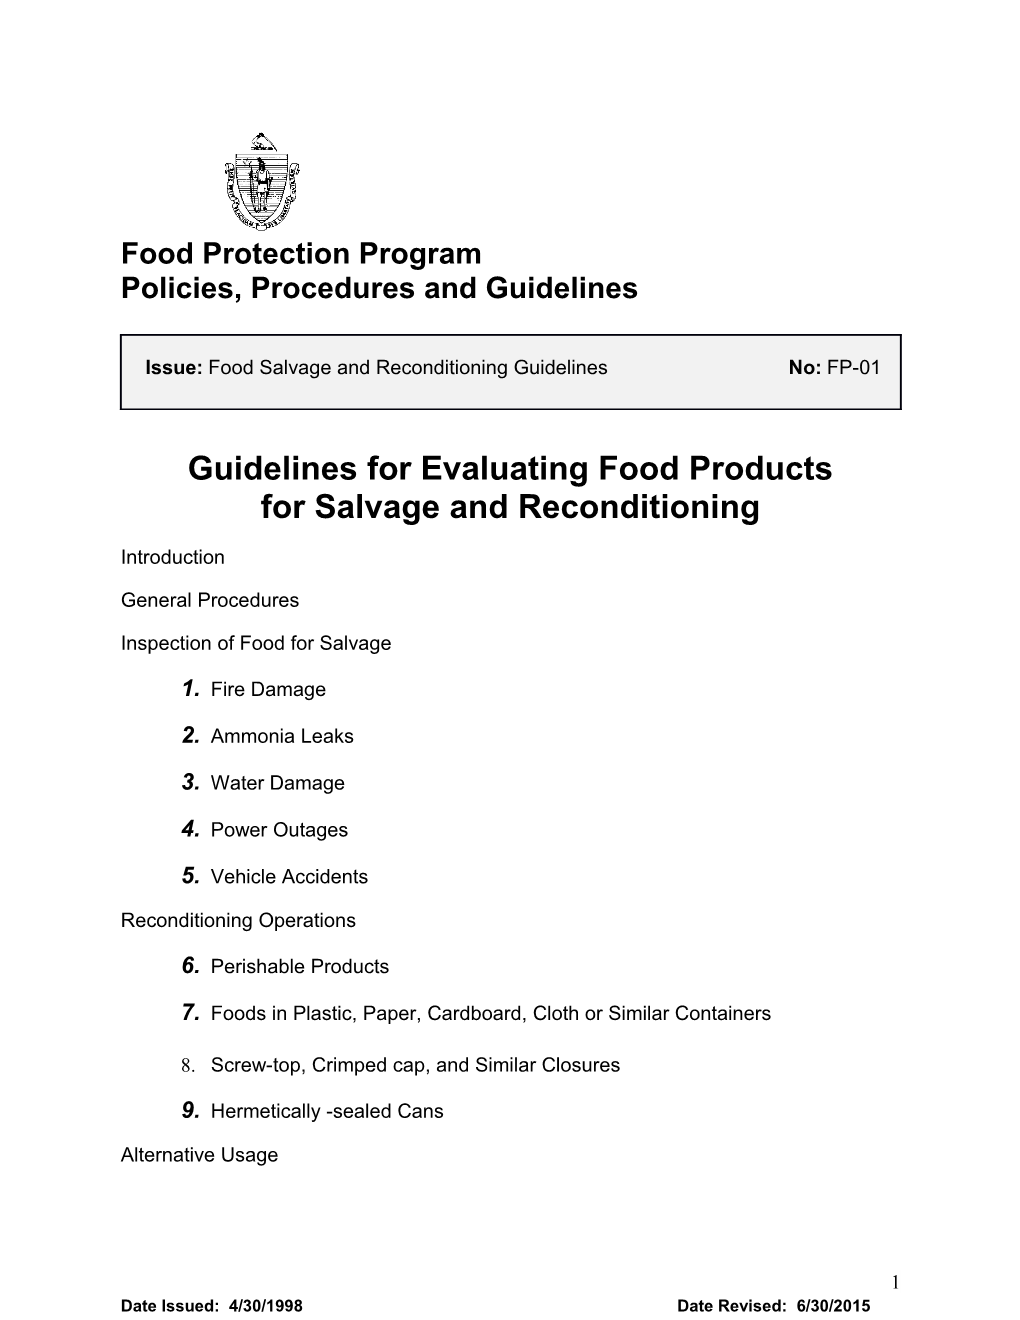 Guidelines for Evaluating Food Products for Salvage and Reconditioning